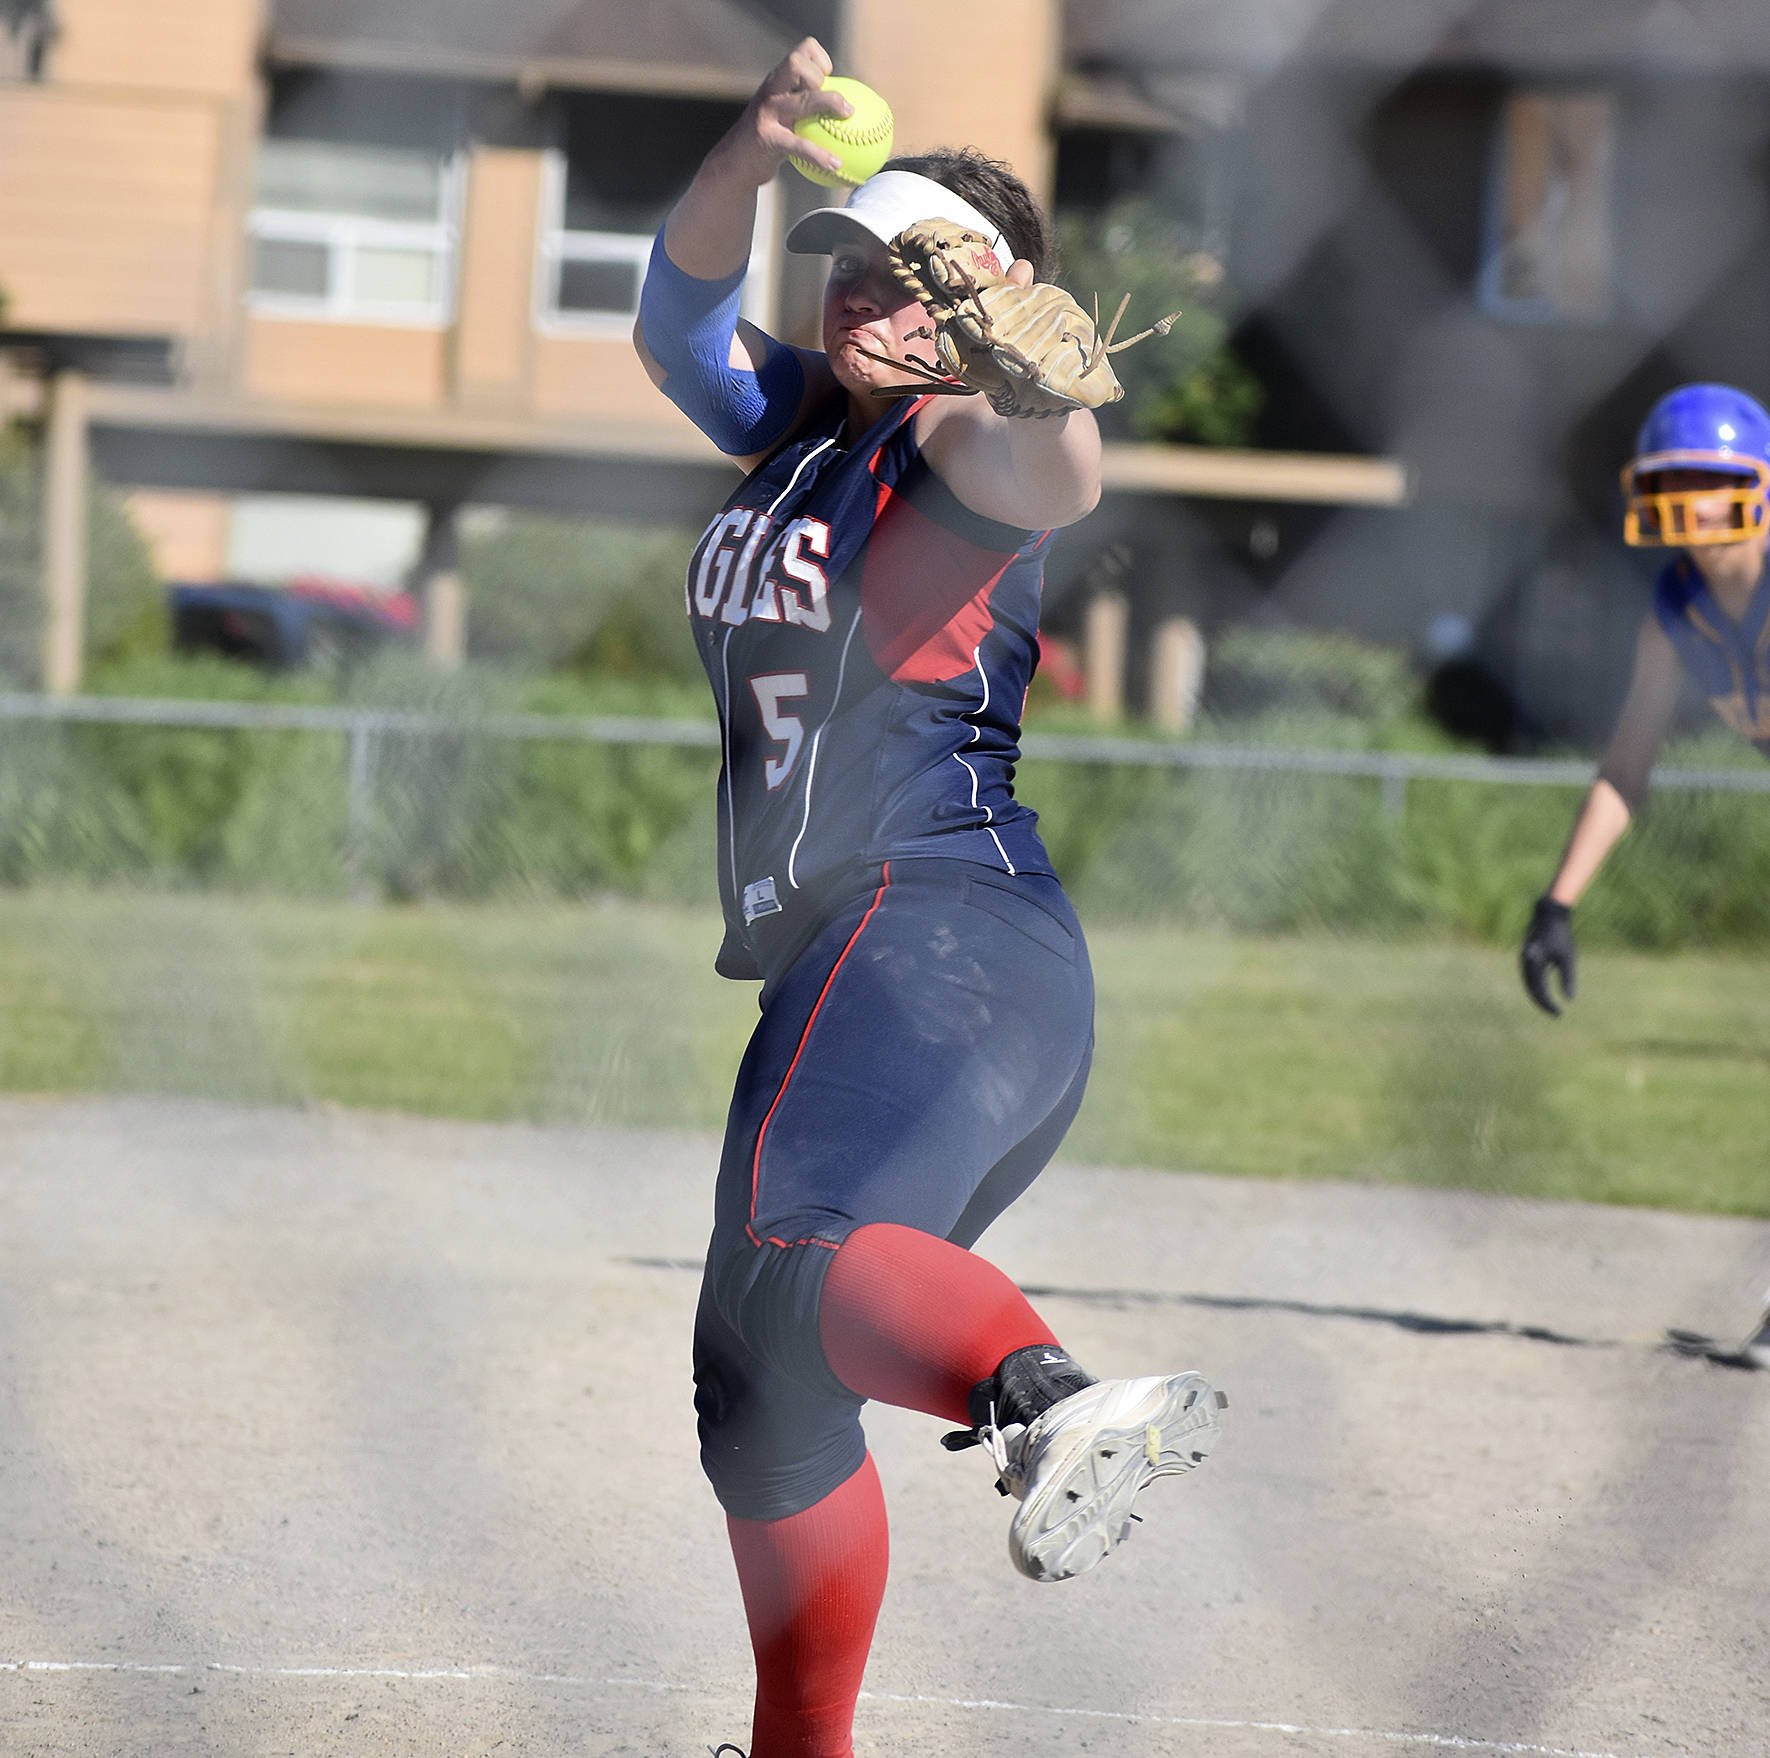 Photo by Haley Ausbun. Lindbergh High School pitcher Lia Evans at the fastpitch game against Fife High School Friday, May 10.